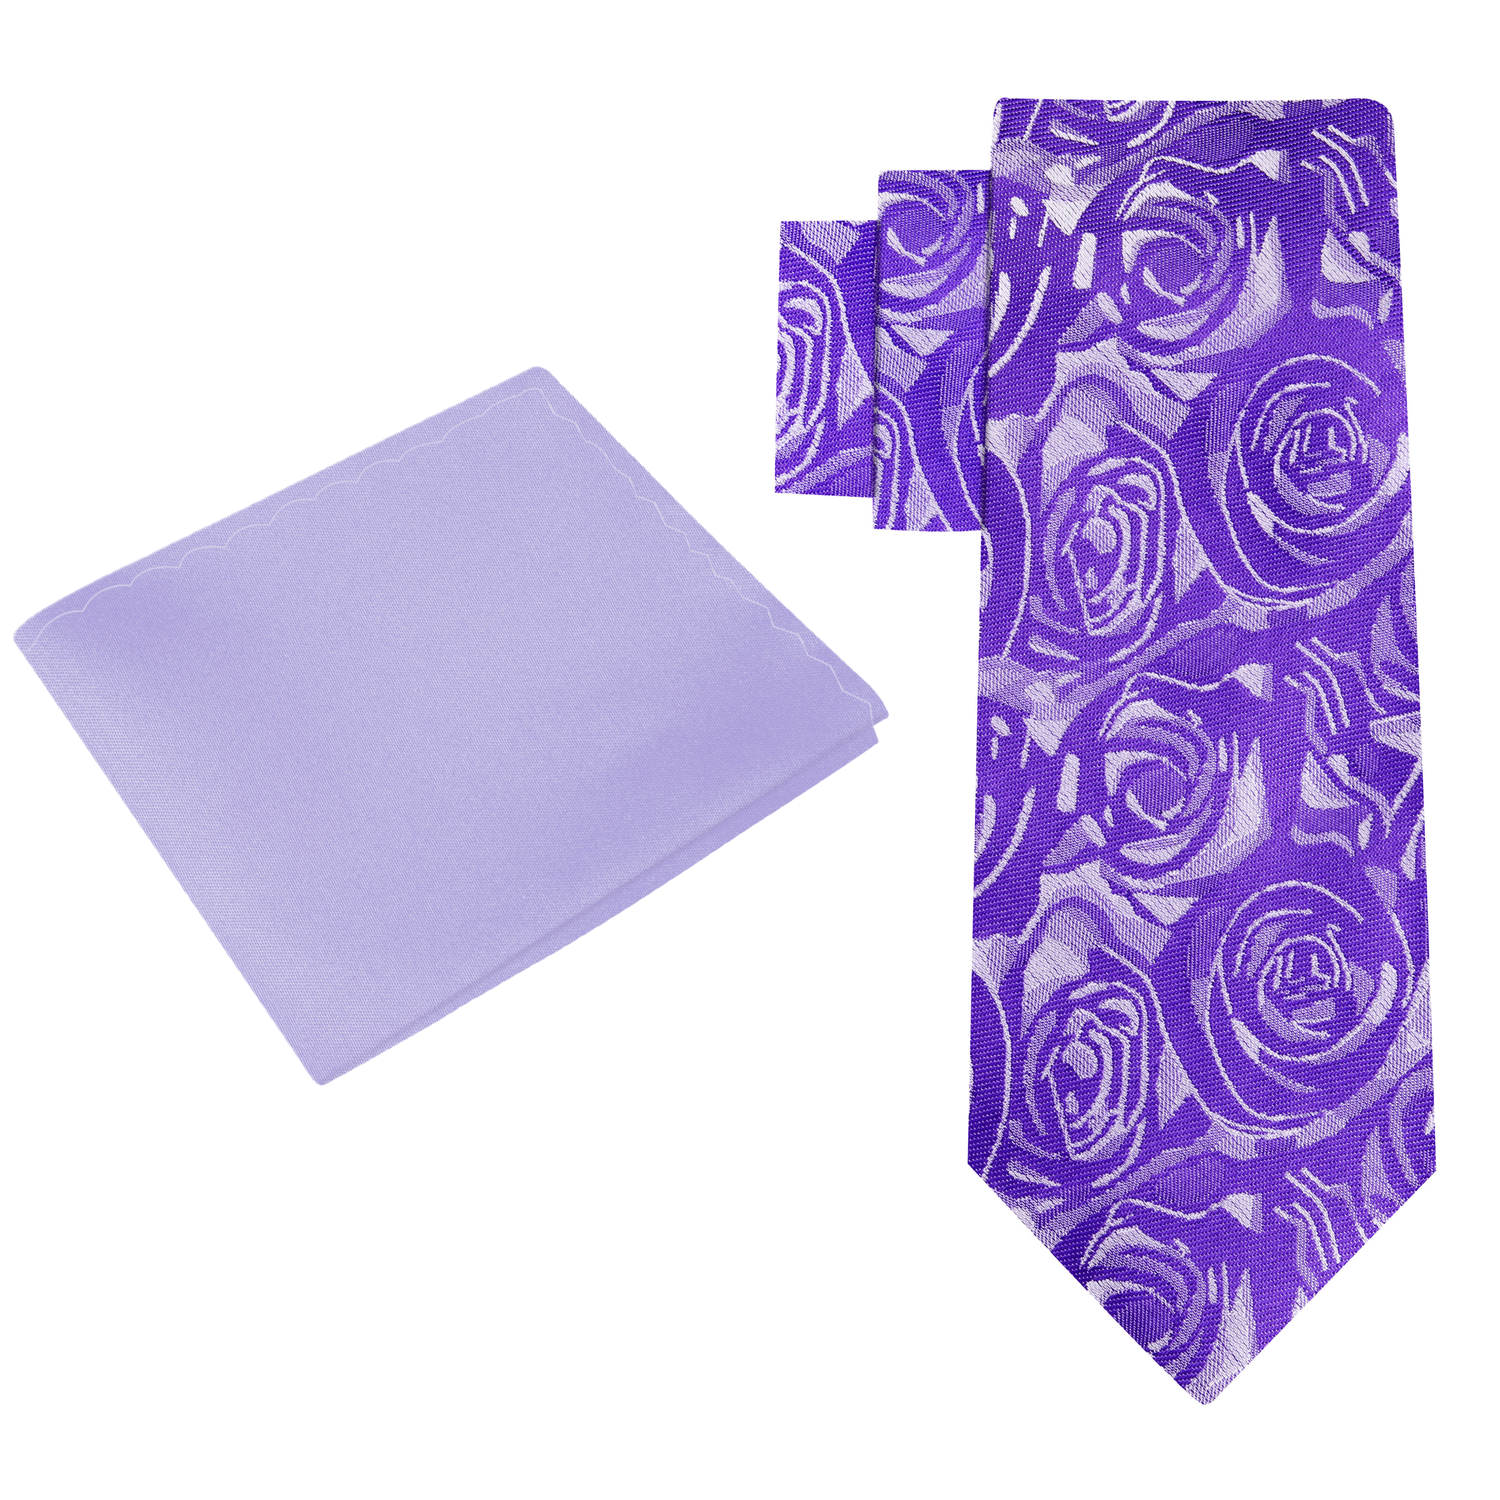 View 2: Shades of Purple Sketched Roses Necktie and Light Purple Square